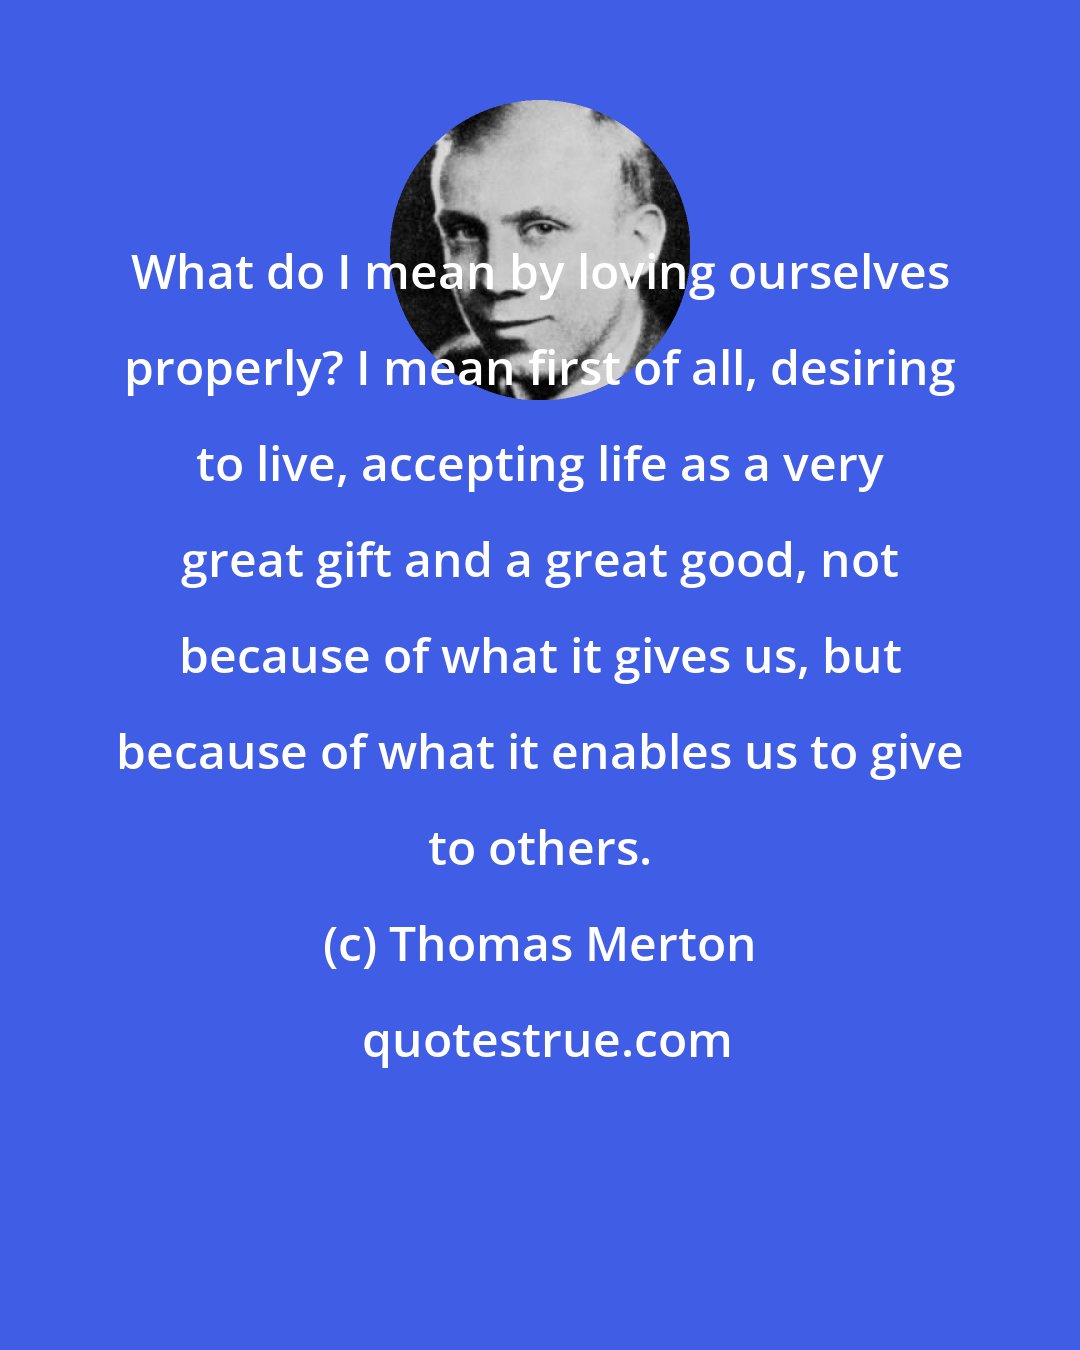 Thomas Merton: What do I mean by loving ourselves properly? I mean first of all, desiring to live, accepting life as a very great gift and a great good, not because of what it gives us, but because of what it enables us to give to others.